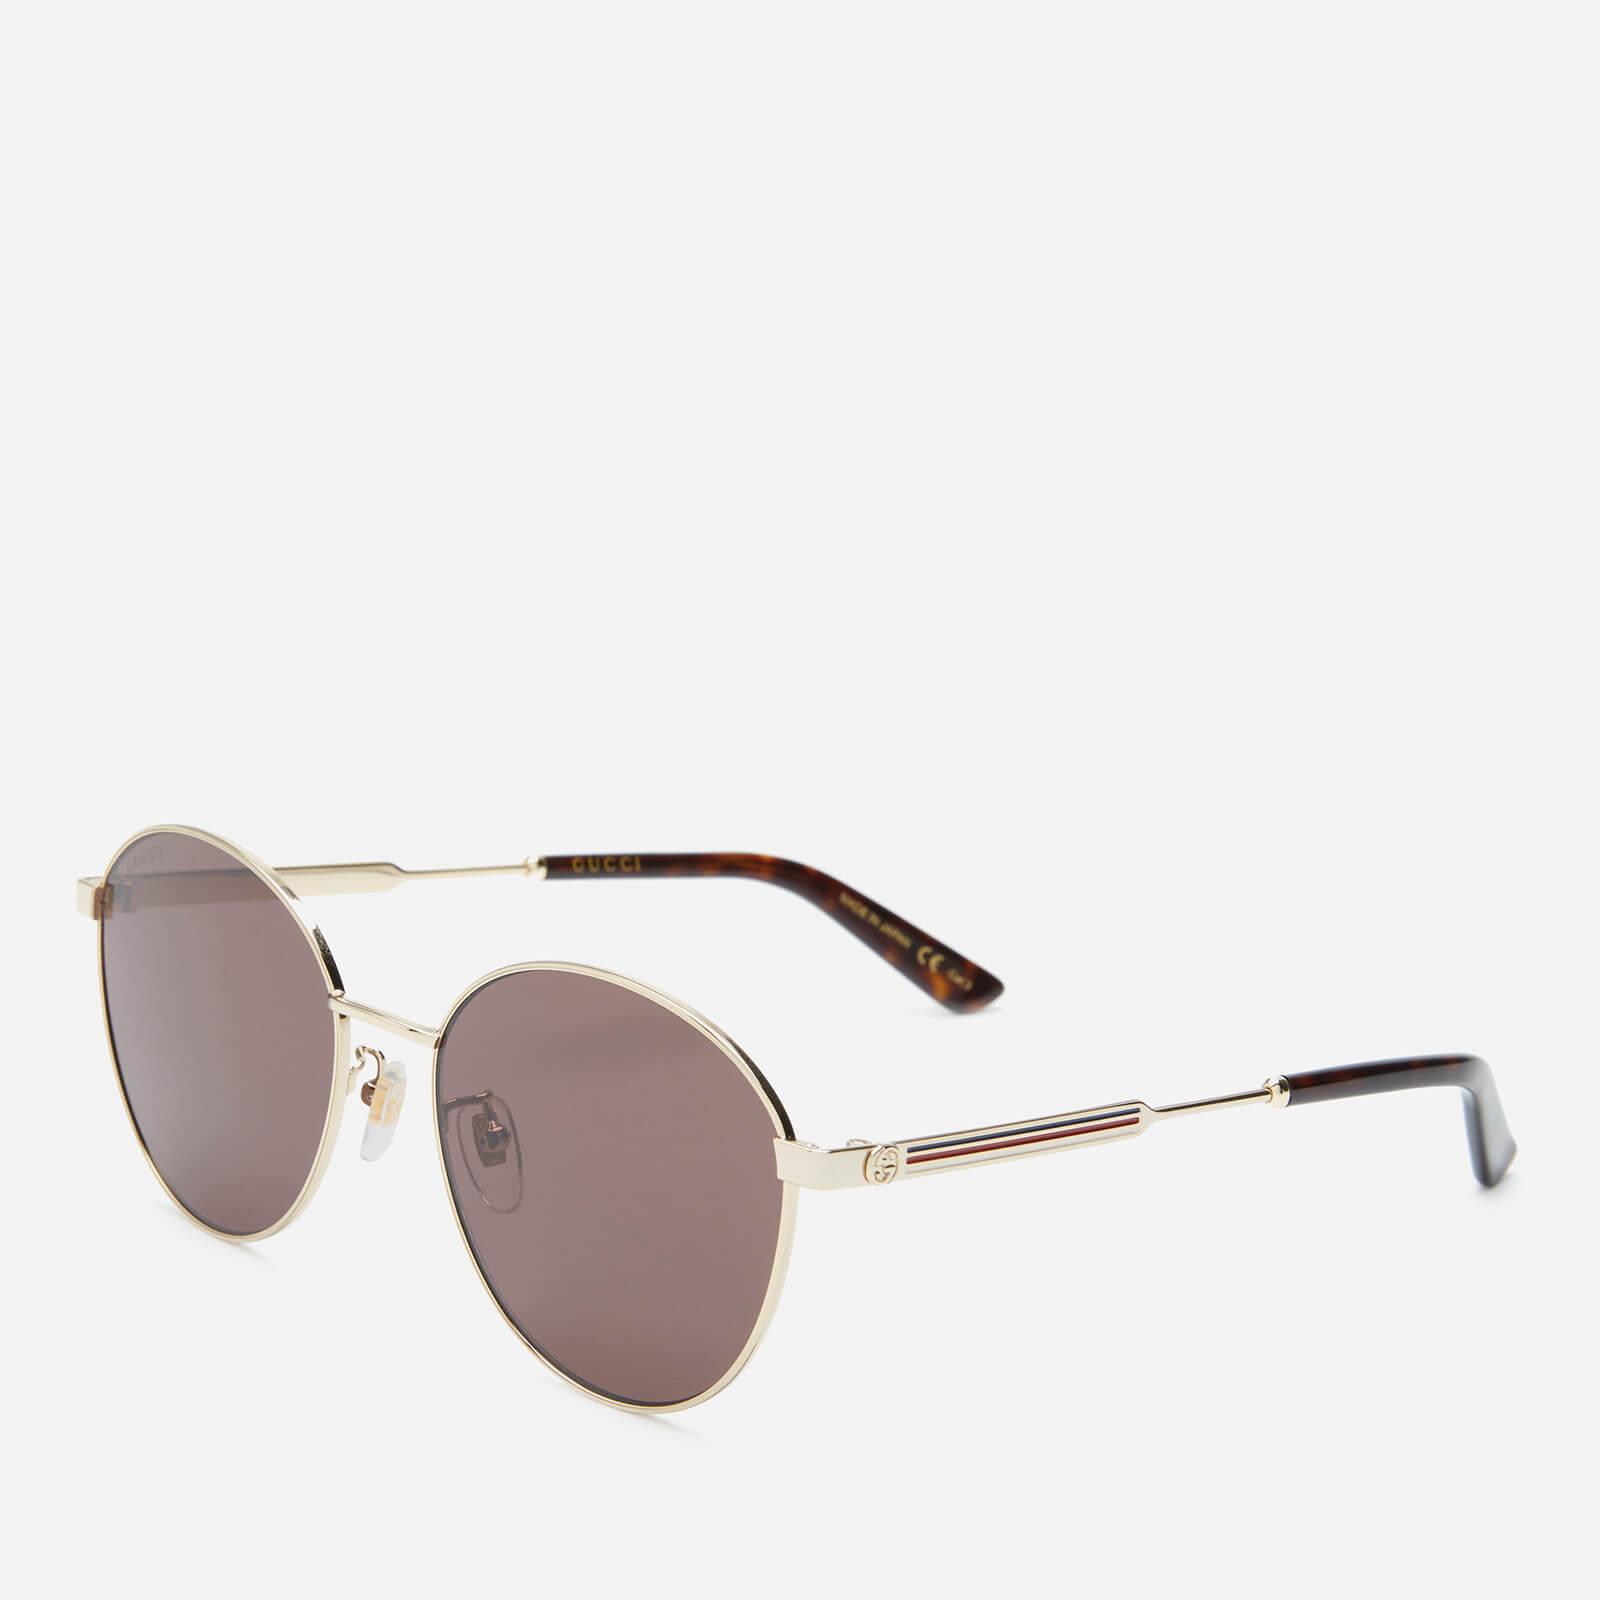 Gucci GG0521S 003 Gold/Brown Round Winged Sunglasses